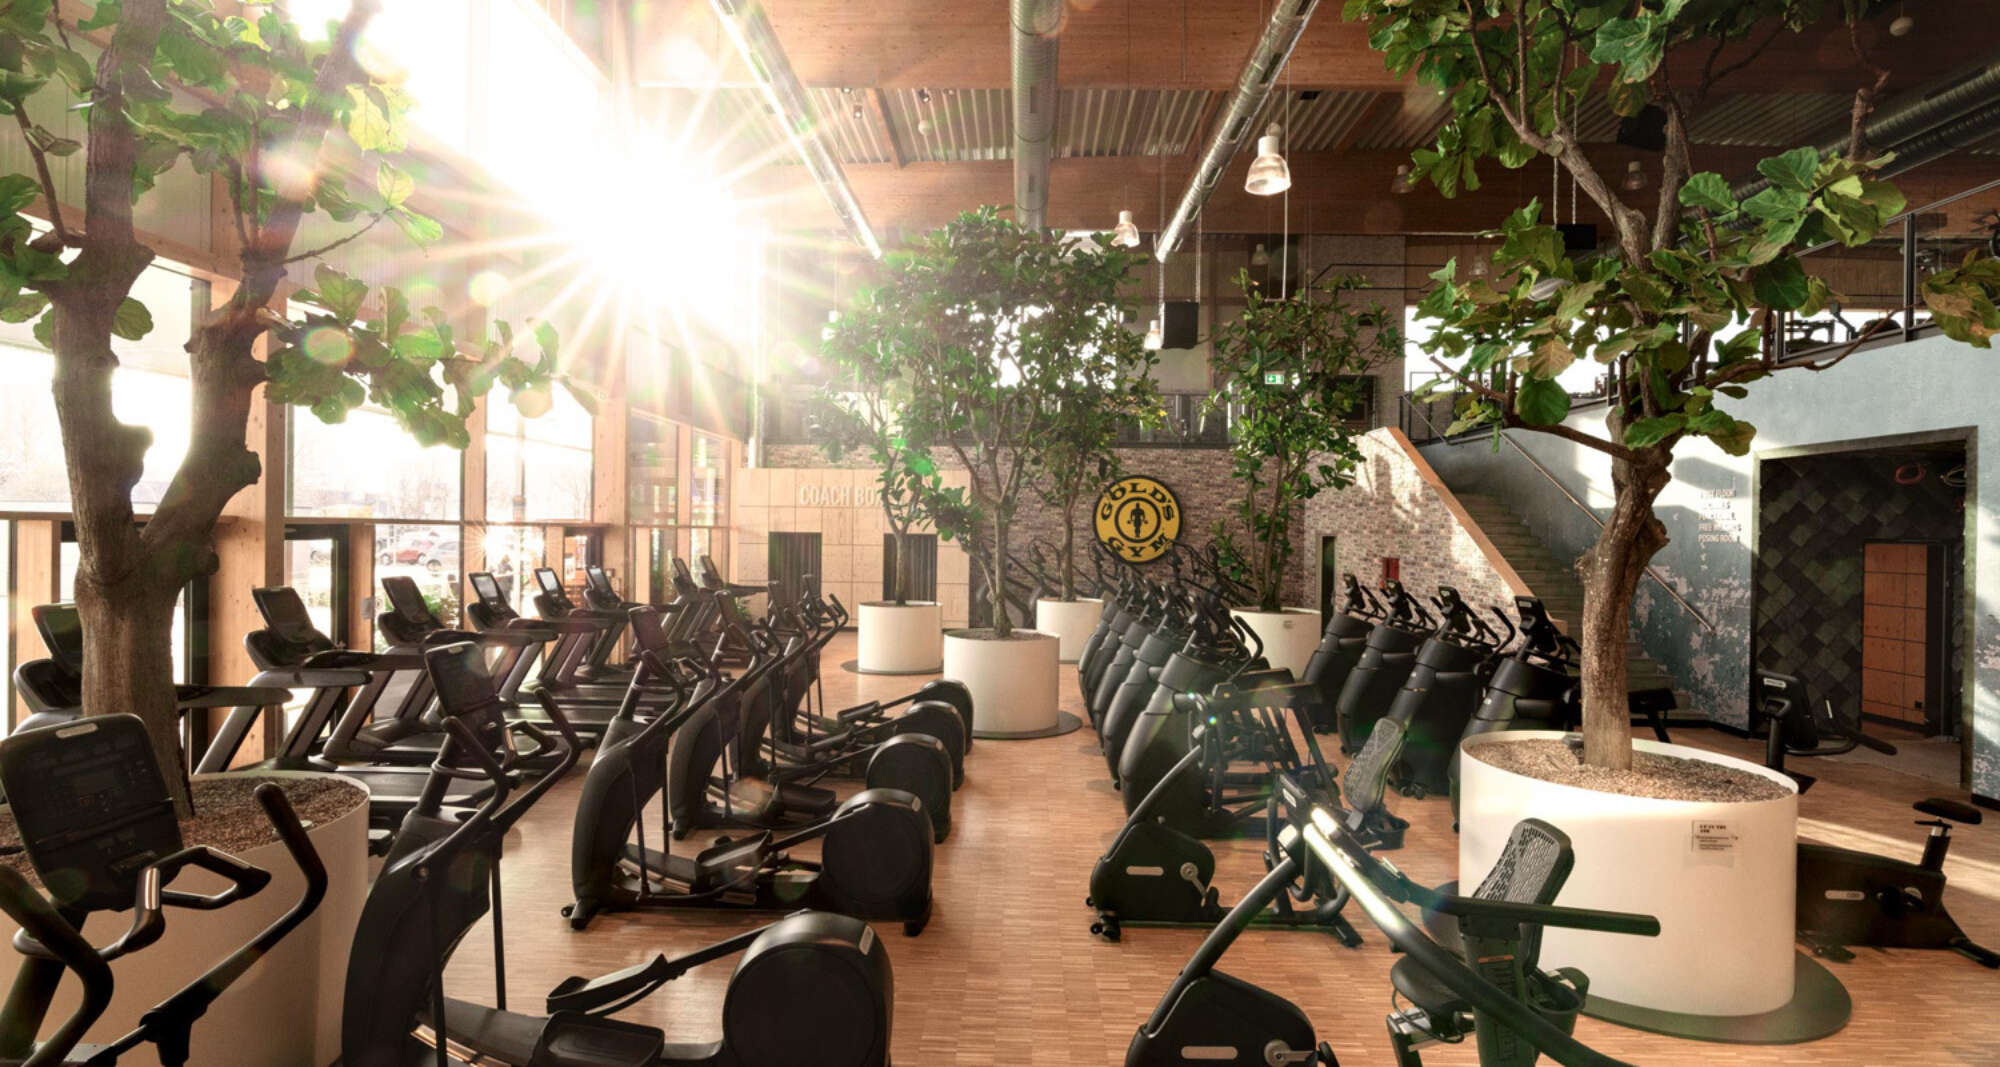 Gold's Gym Cardio Garden with rows of exercise bikes surrounded by indoor trees